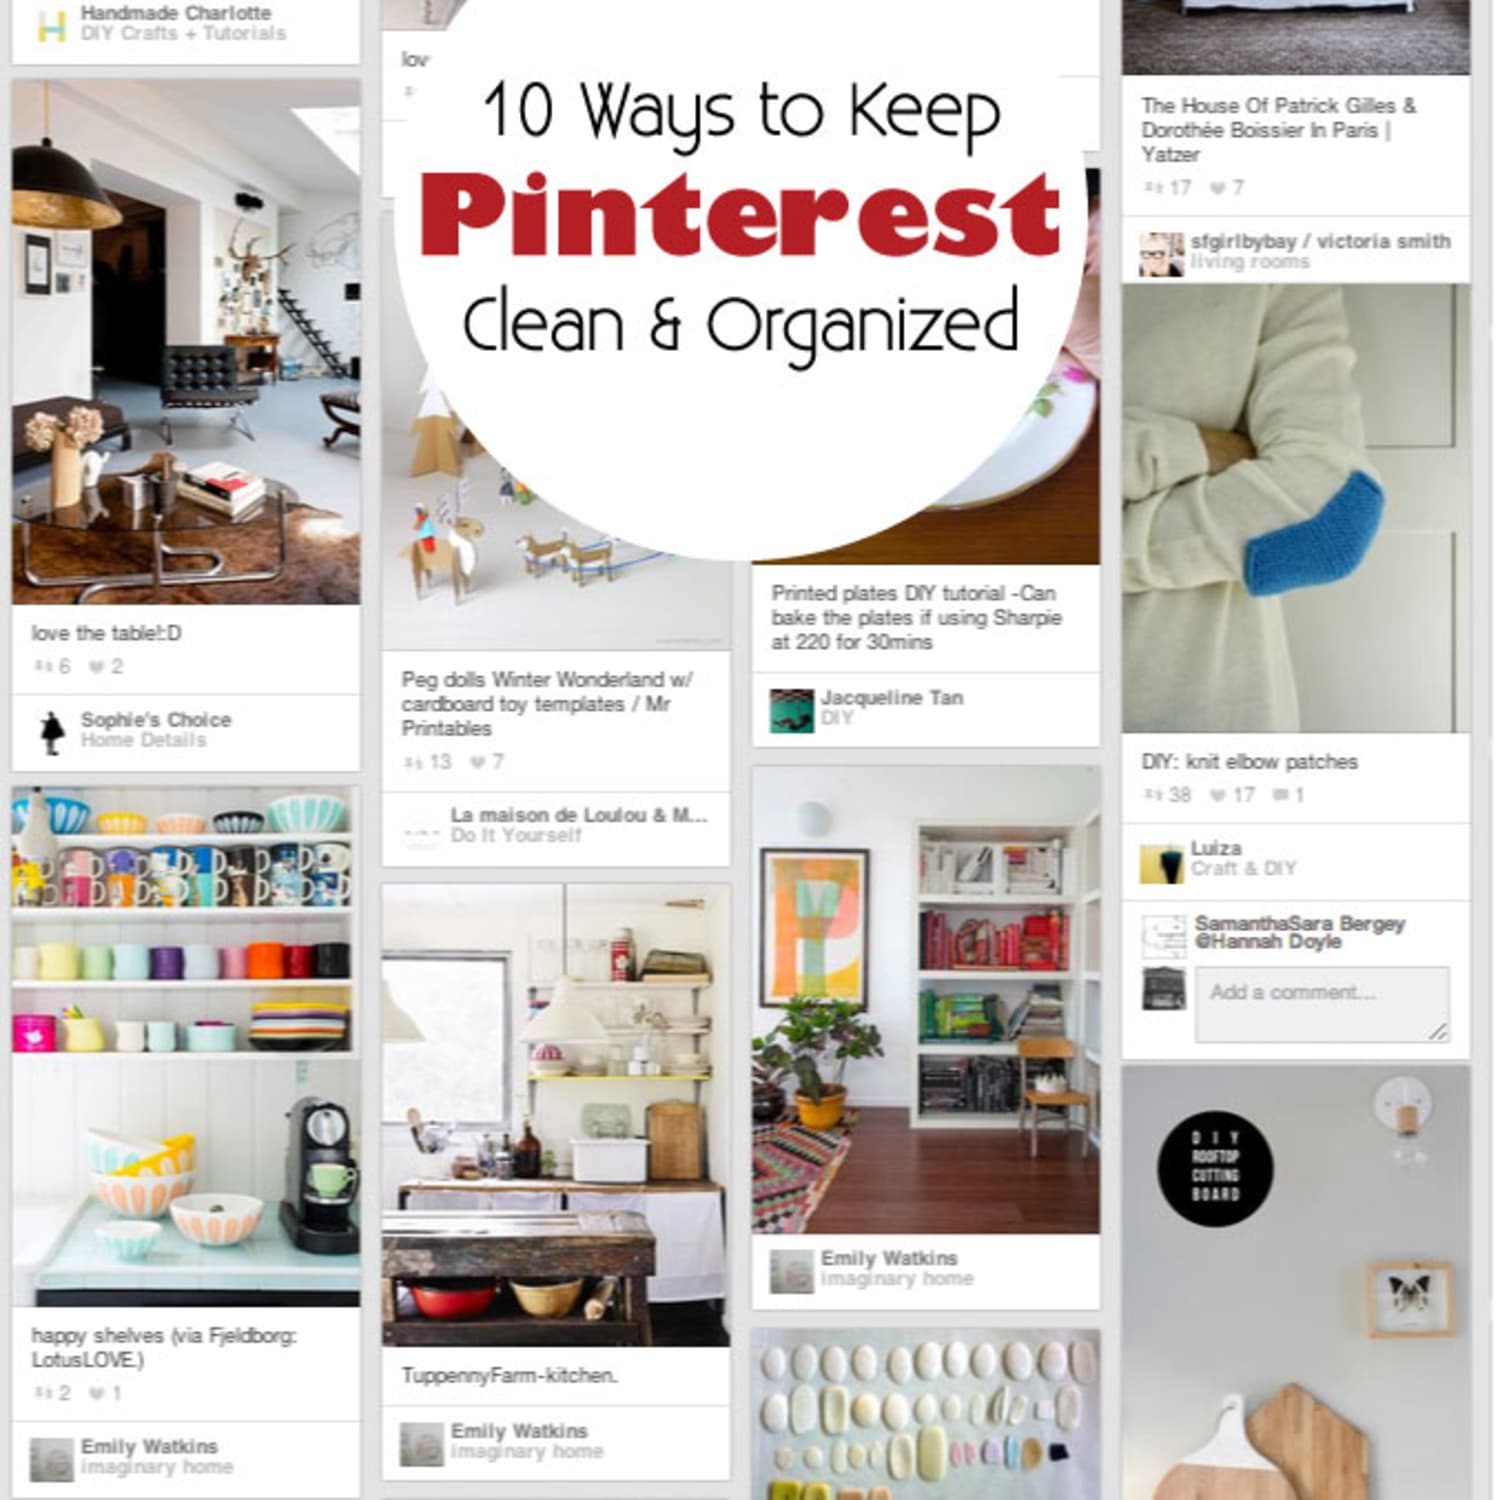 Pins I've Tried: How to Organize Cleaning Supplies - Pinterest Addict